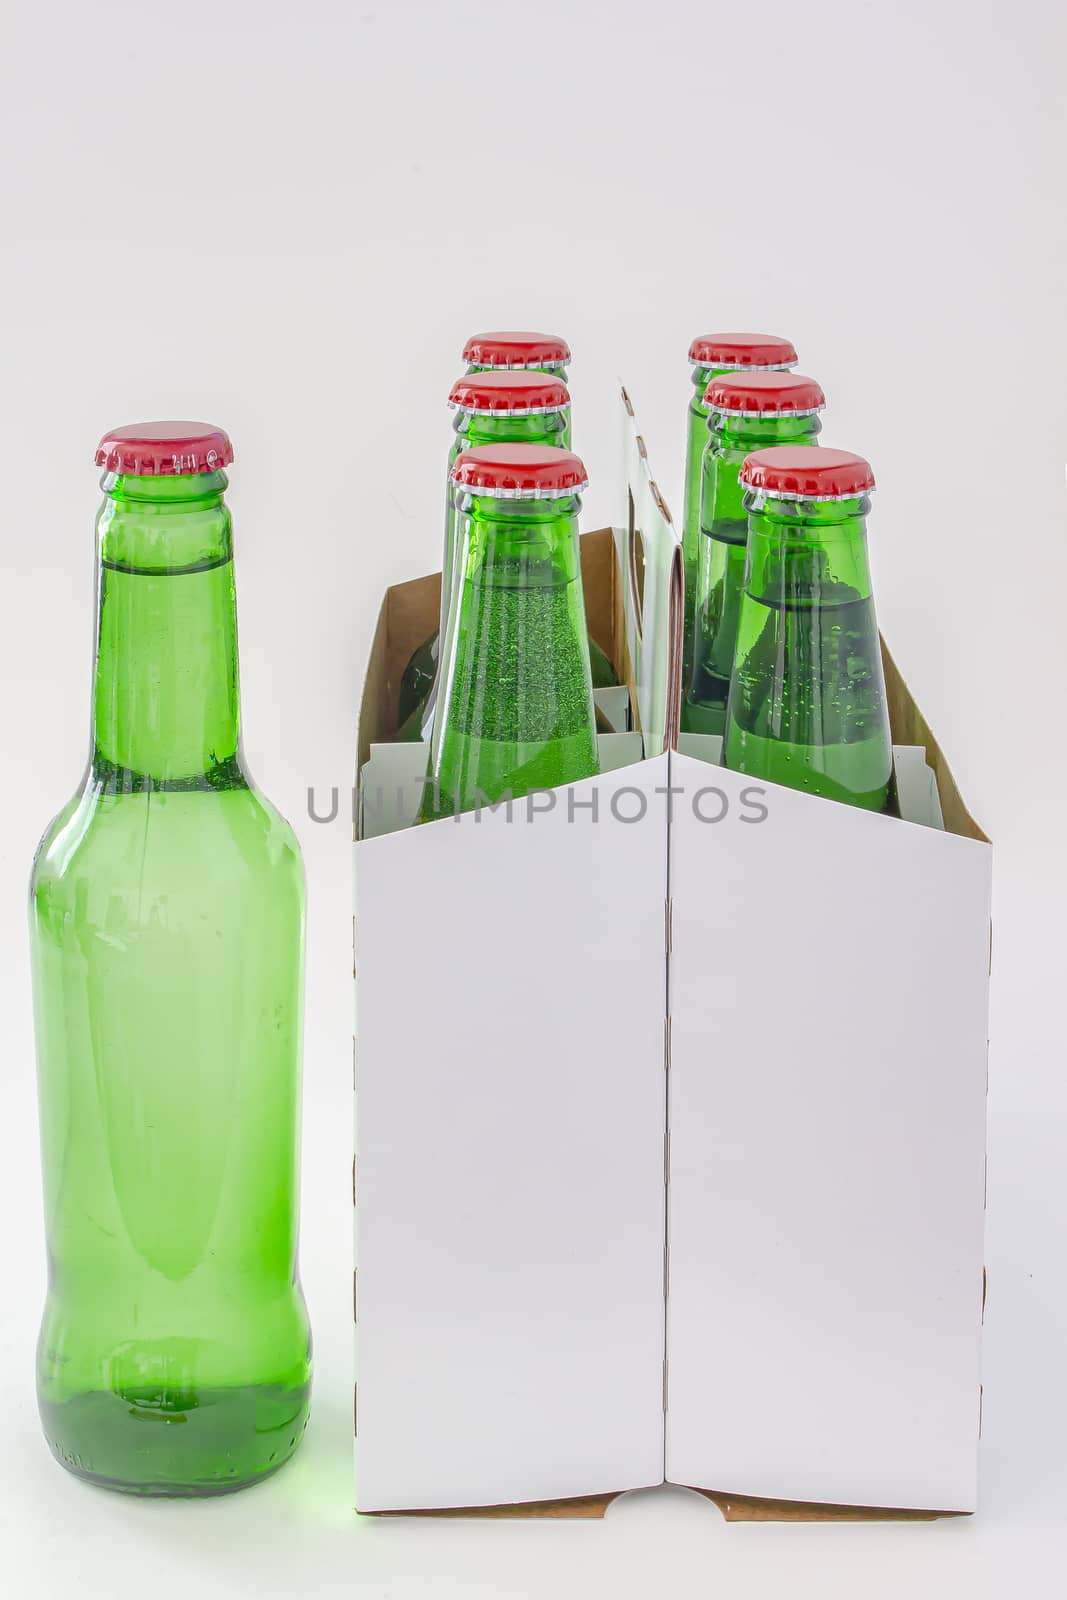 A six pack of a green beer bottles isolated on white background by oasisamuel